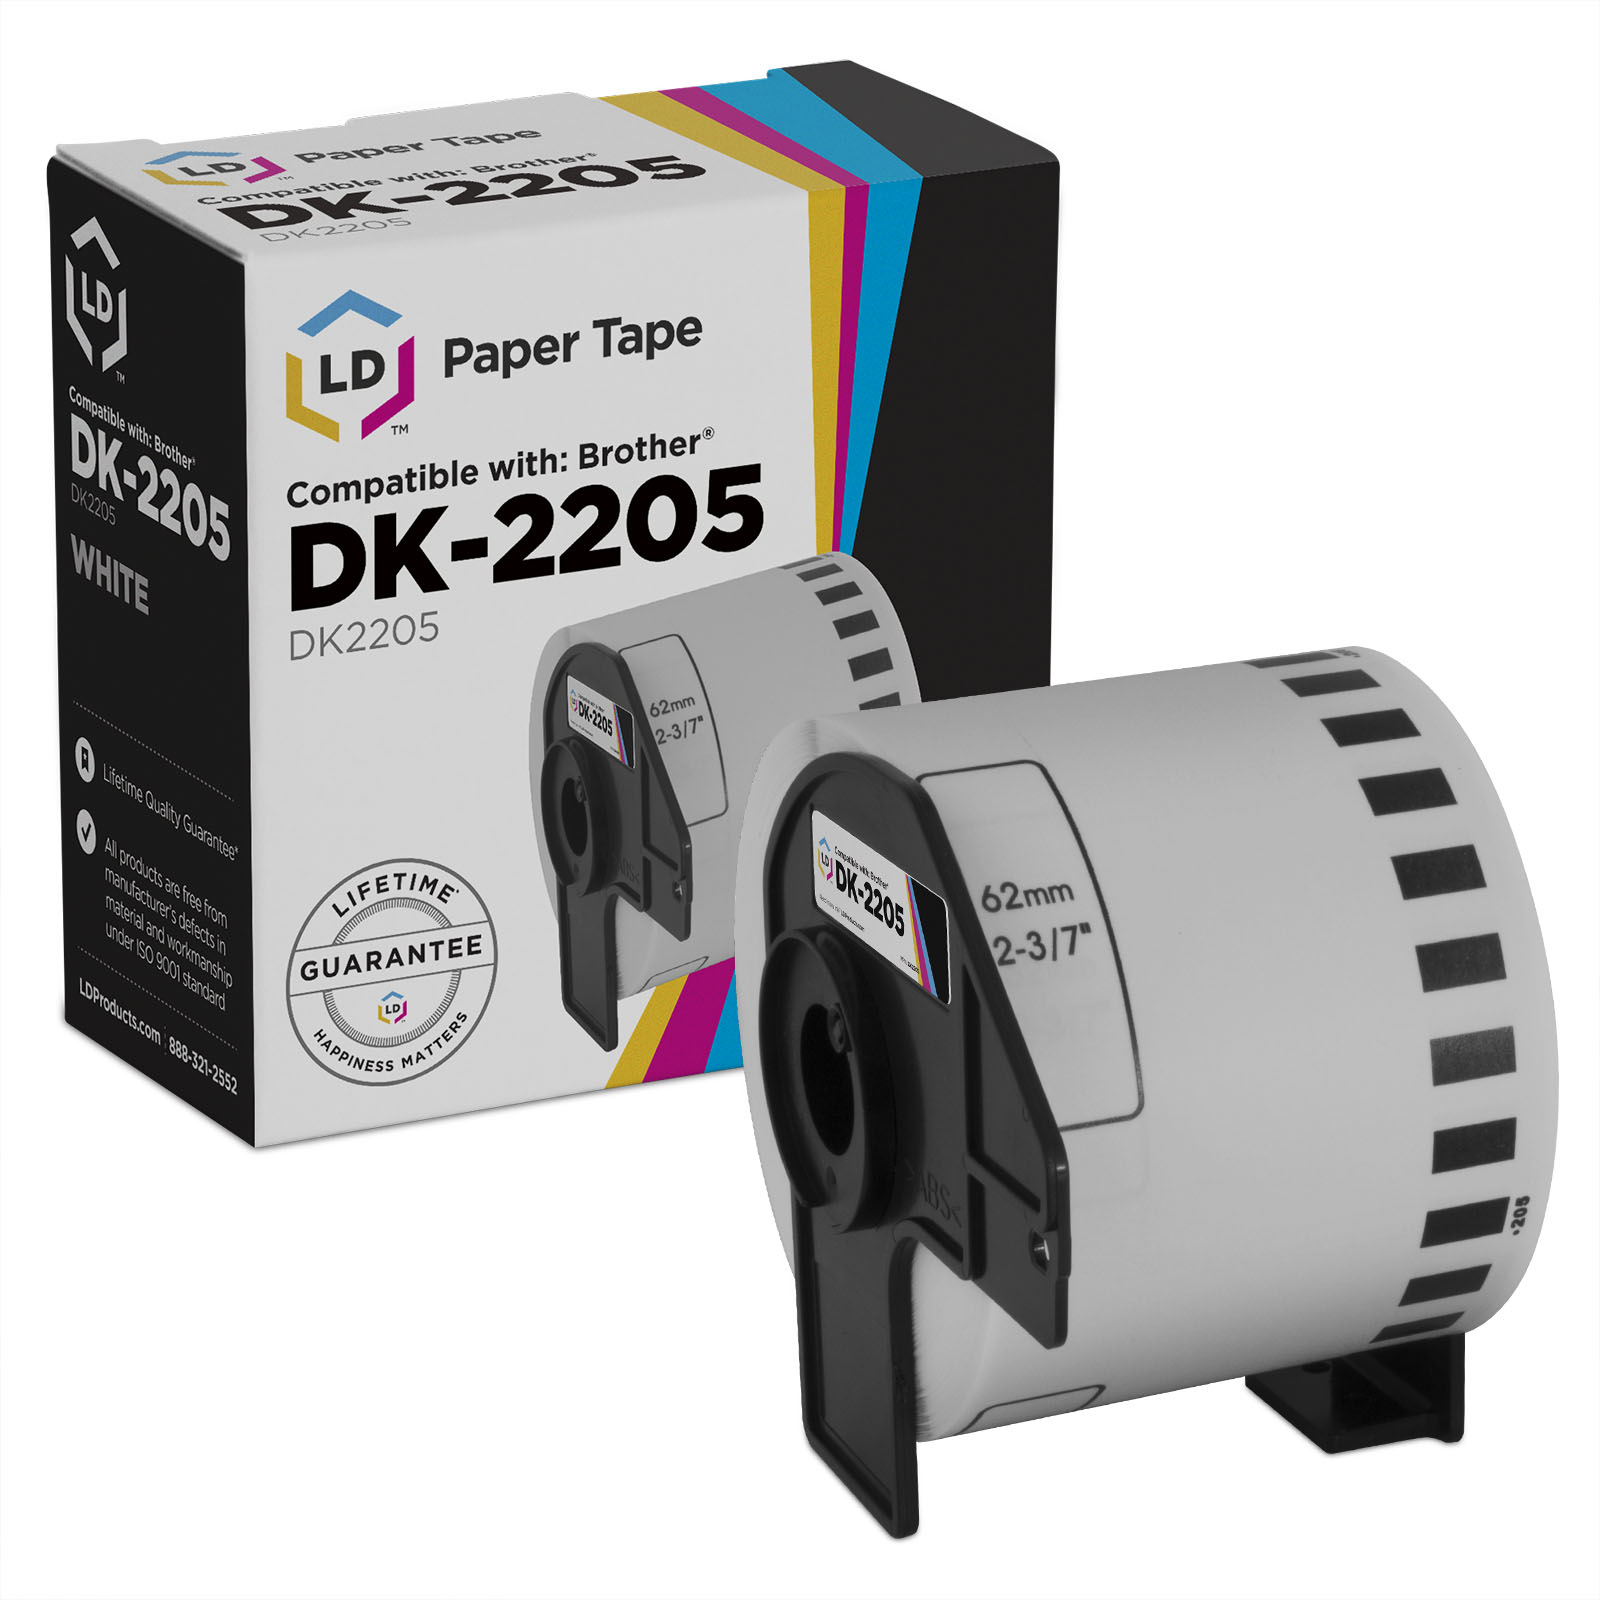 LD Compatible DK-2205 White Label Tape / 2.4 in x 100 ft - image 1 of 1